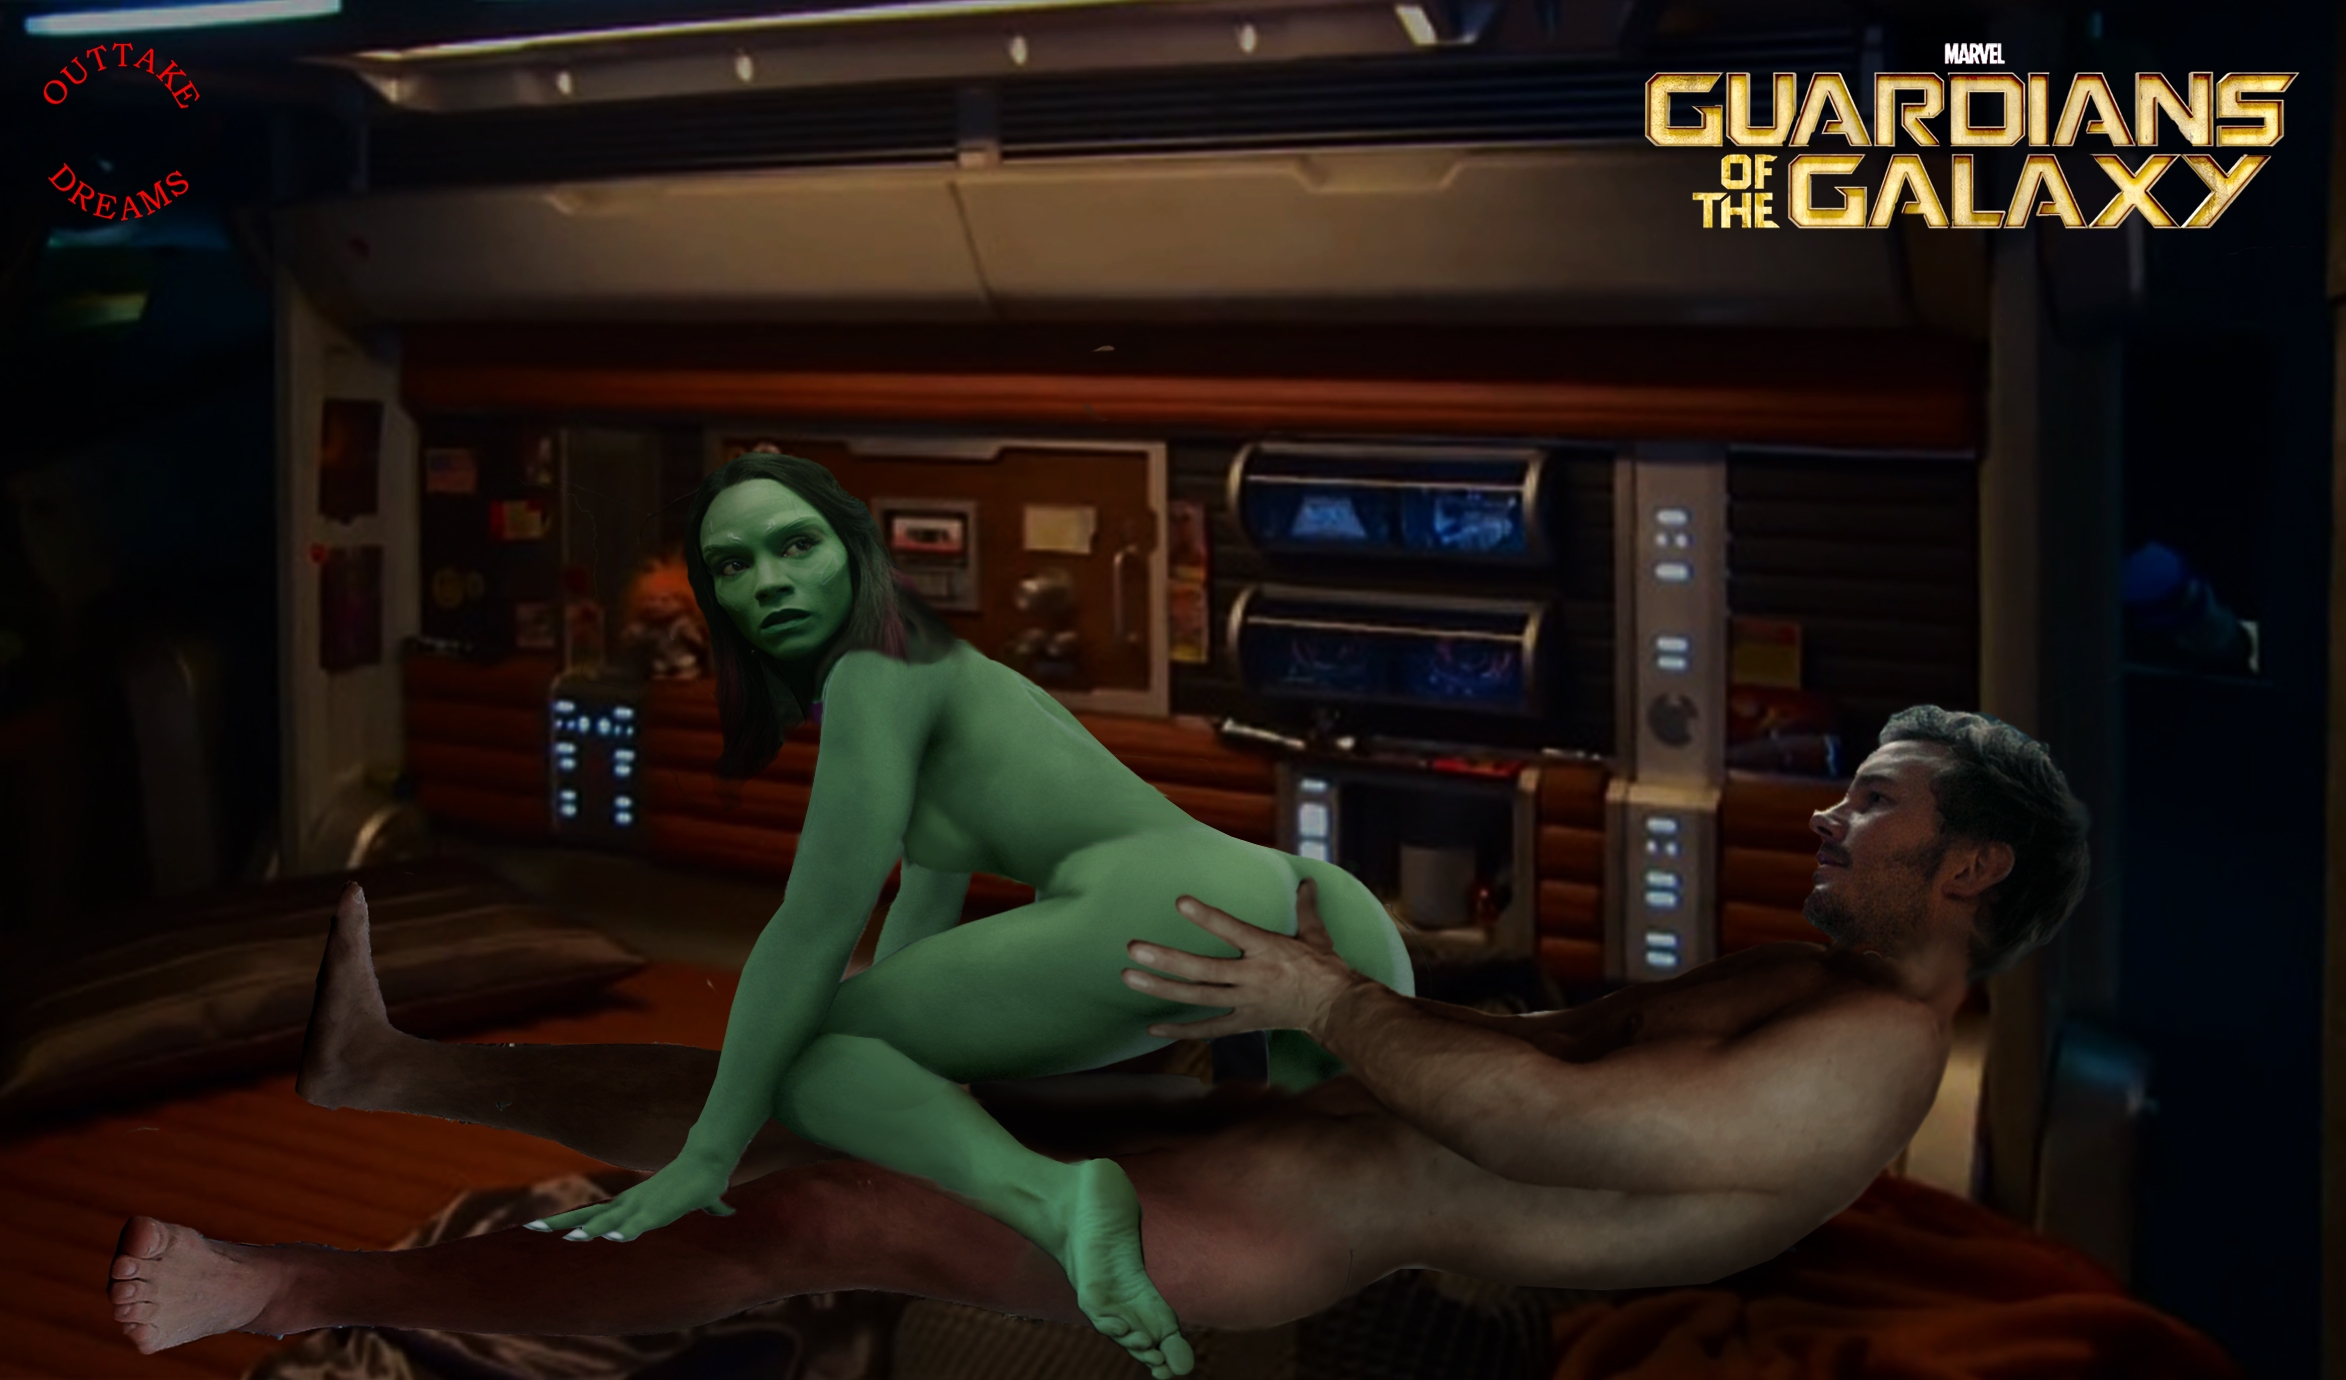 GUARDIANS OF THE GALAXY (73 photos) .